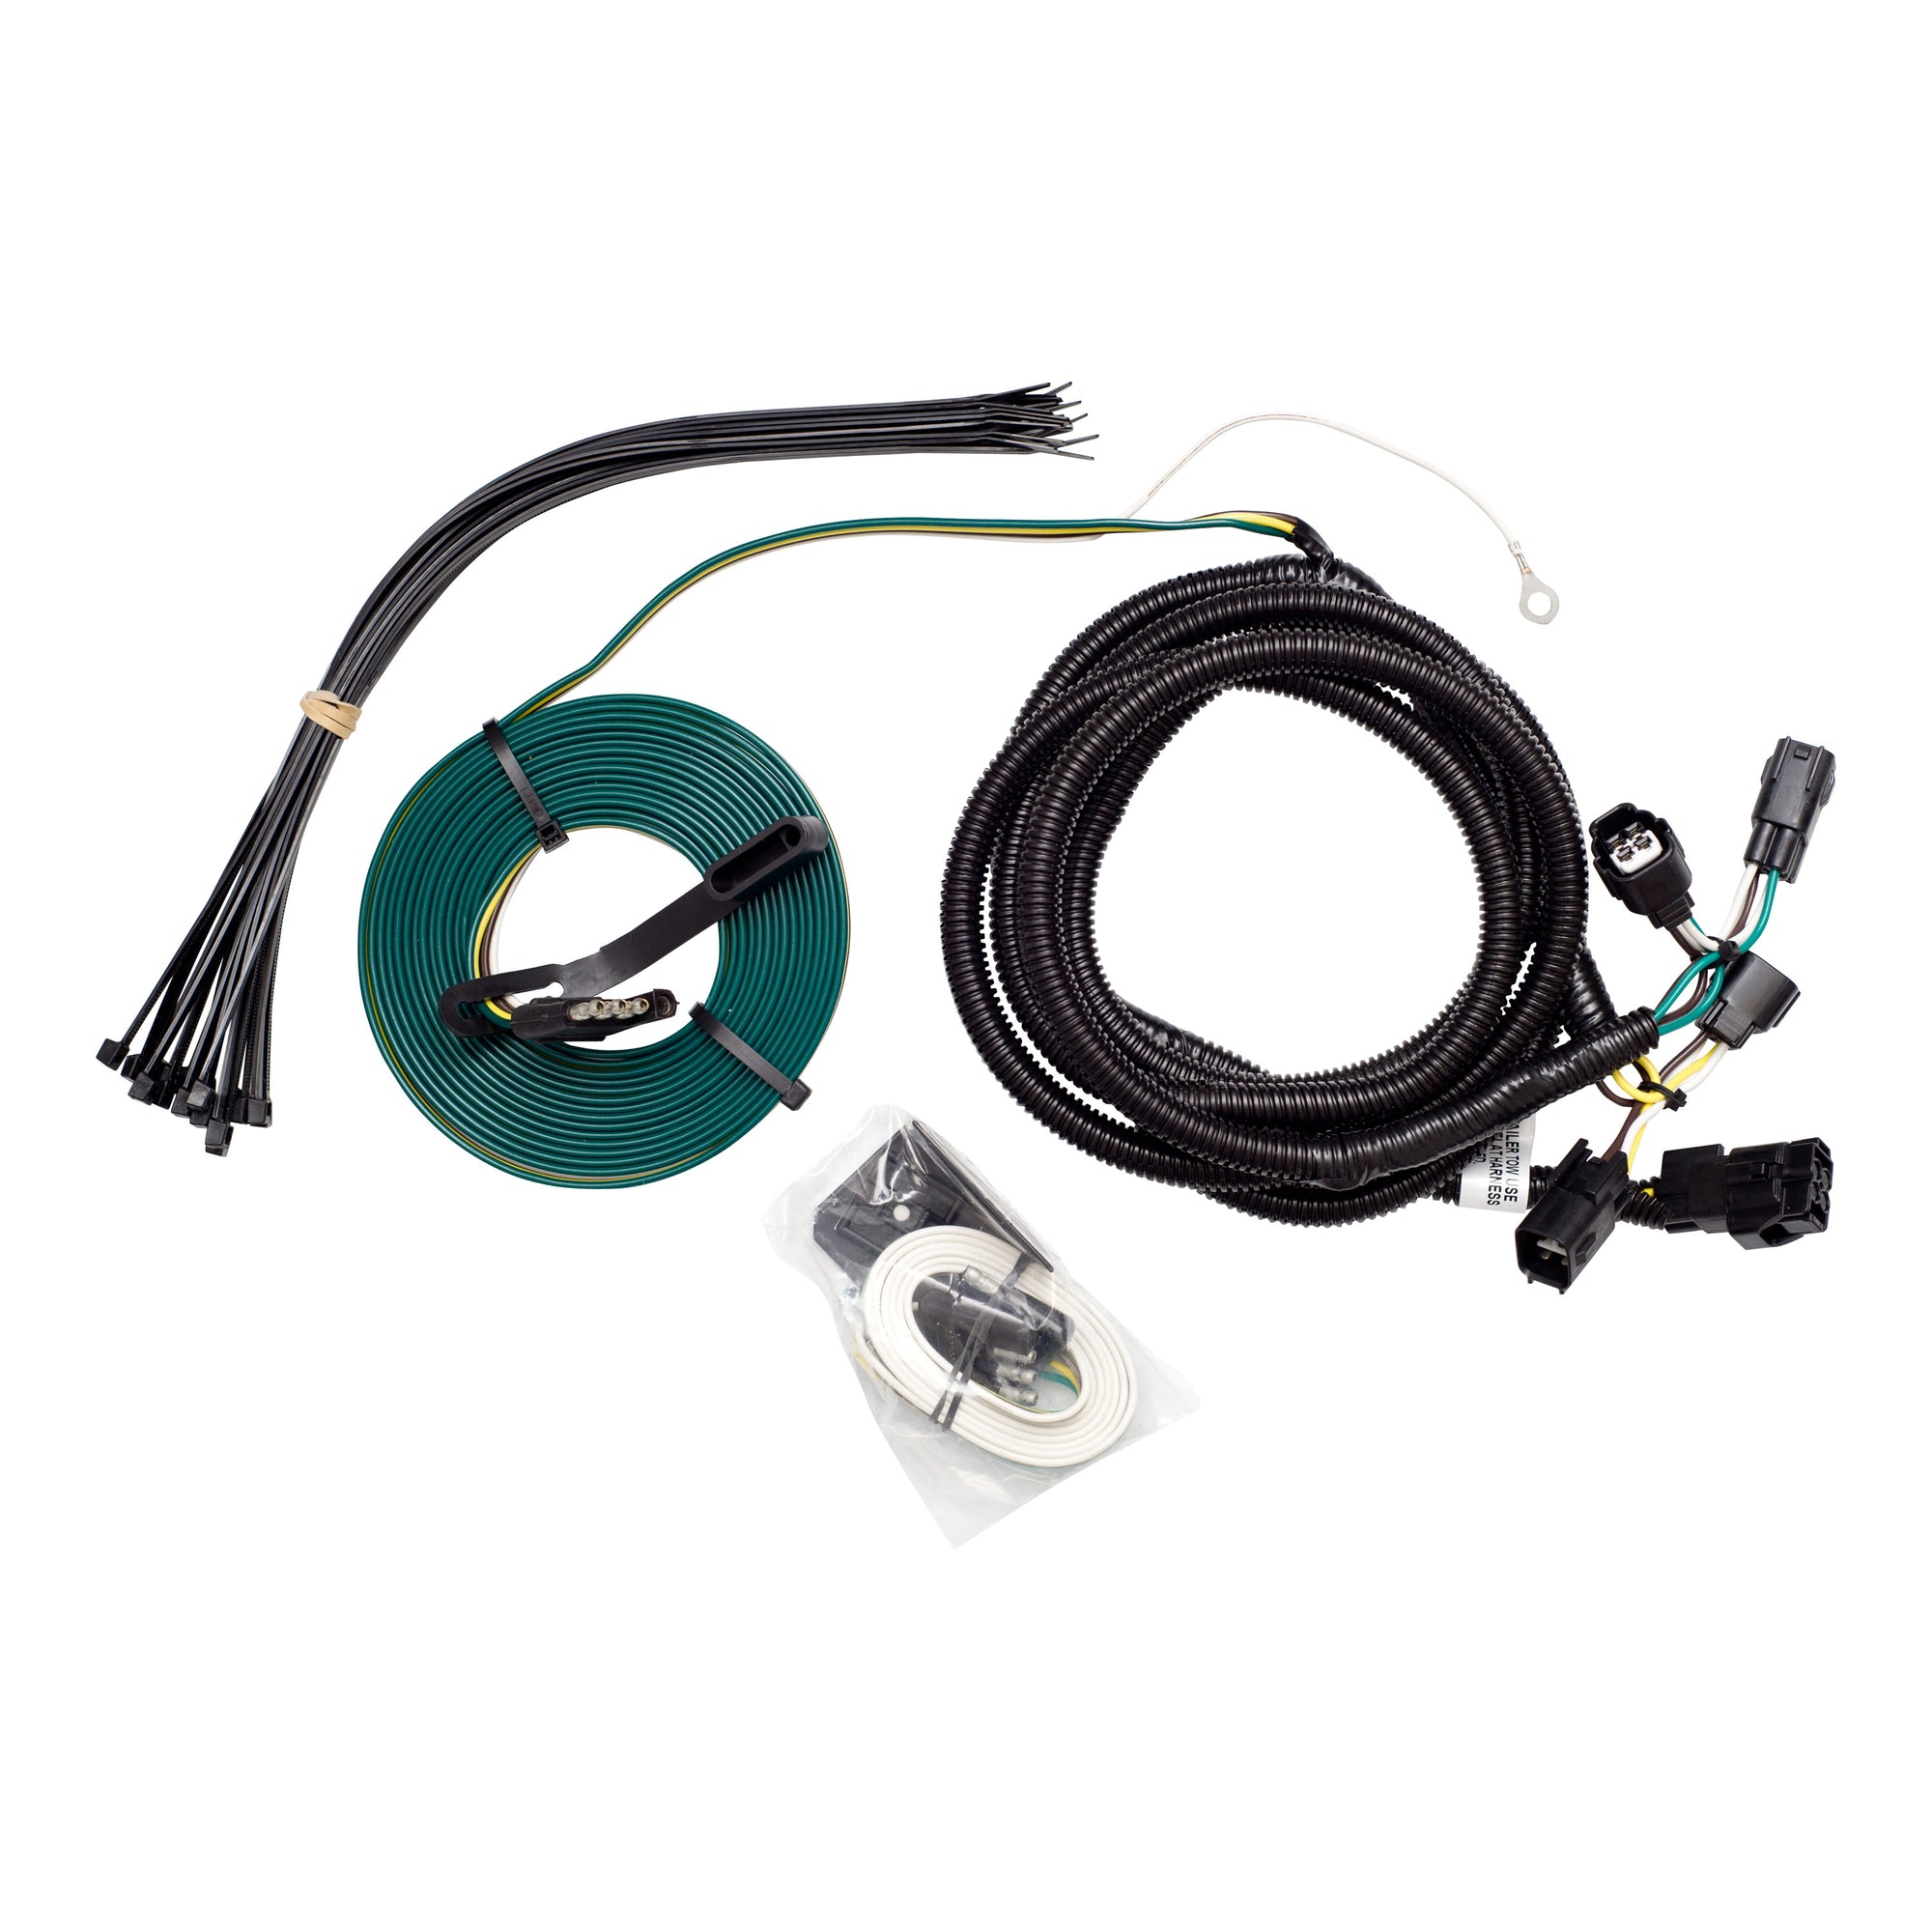 Demco 9523097 Towed Connector Wiring Kit - 9523097